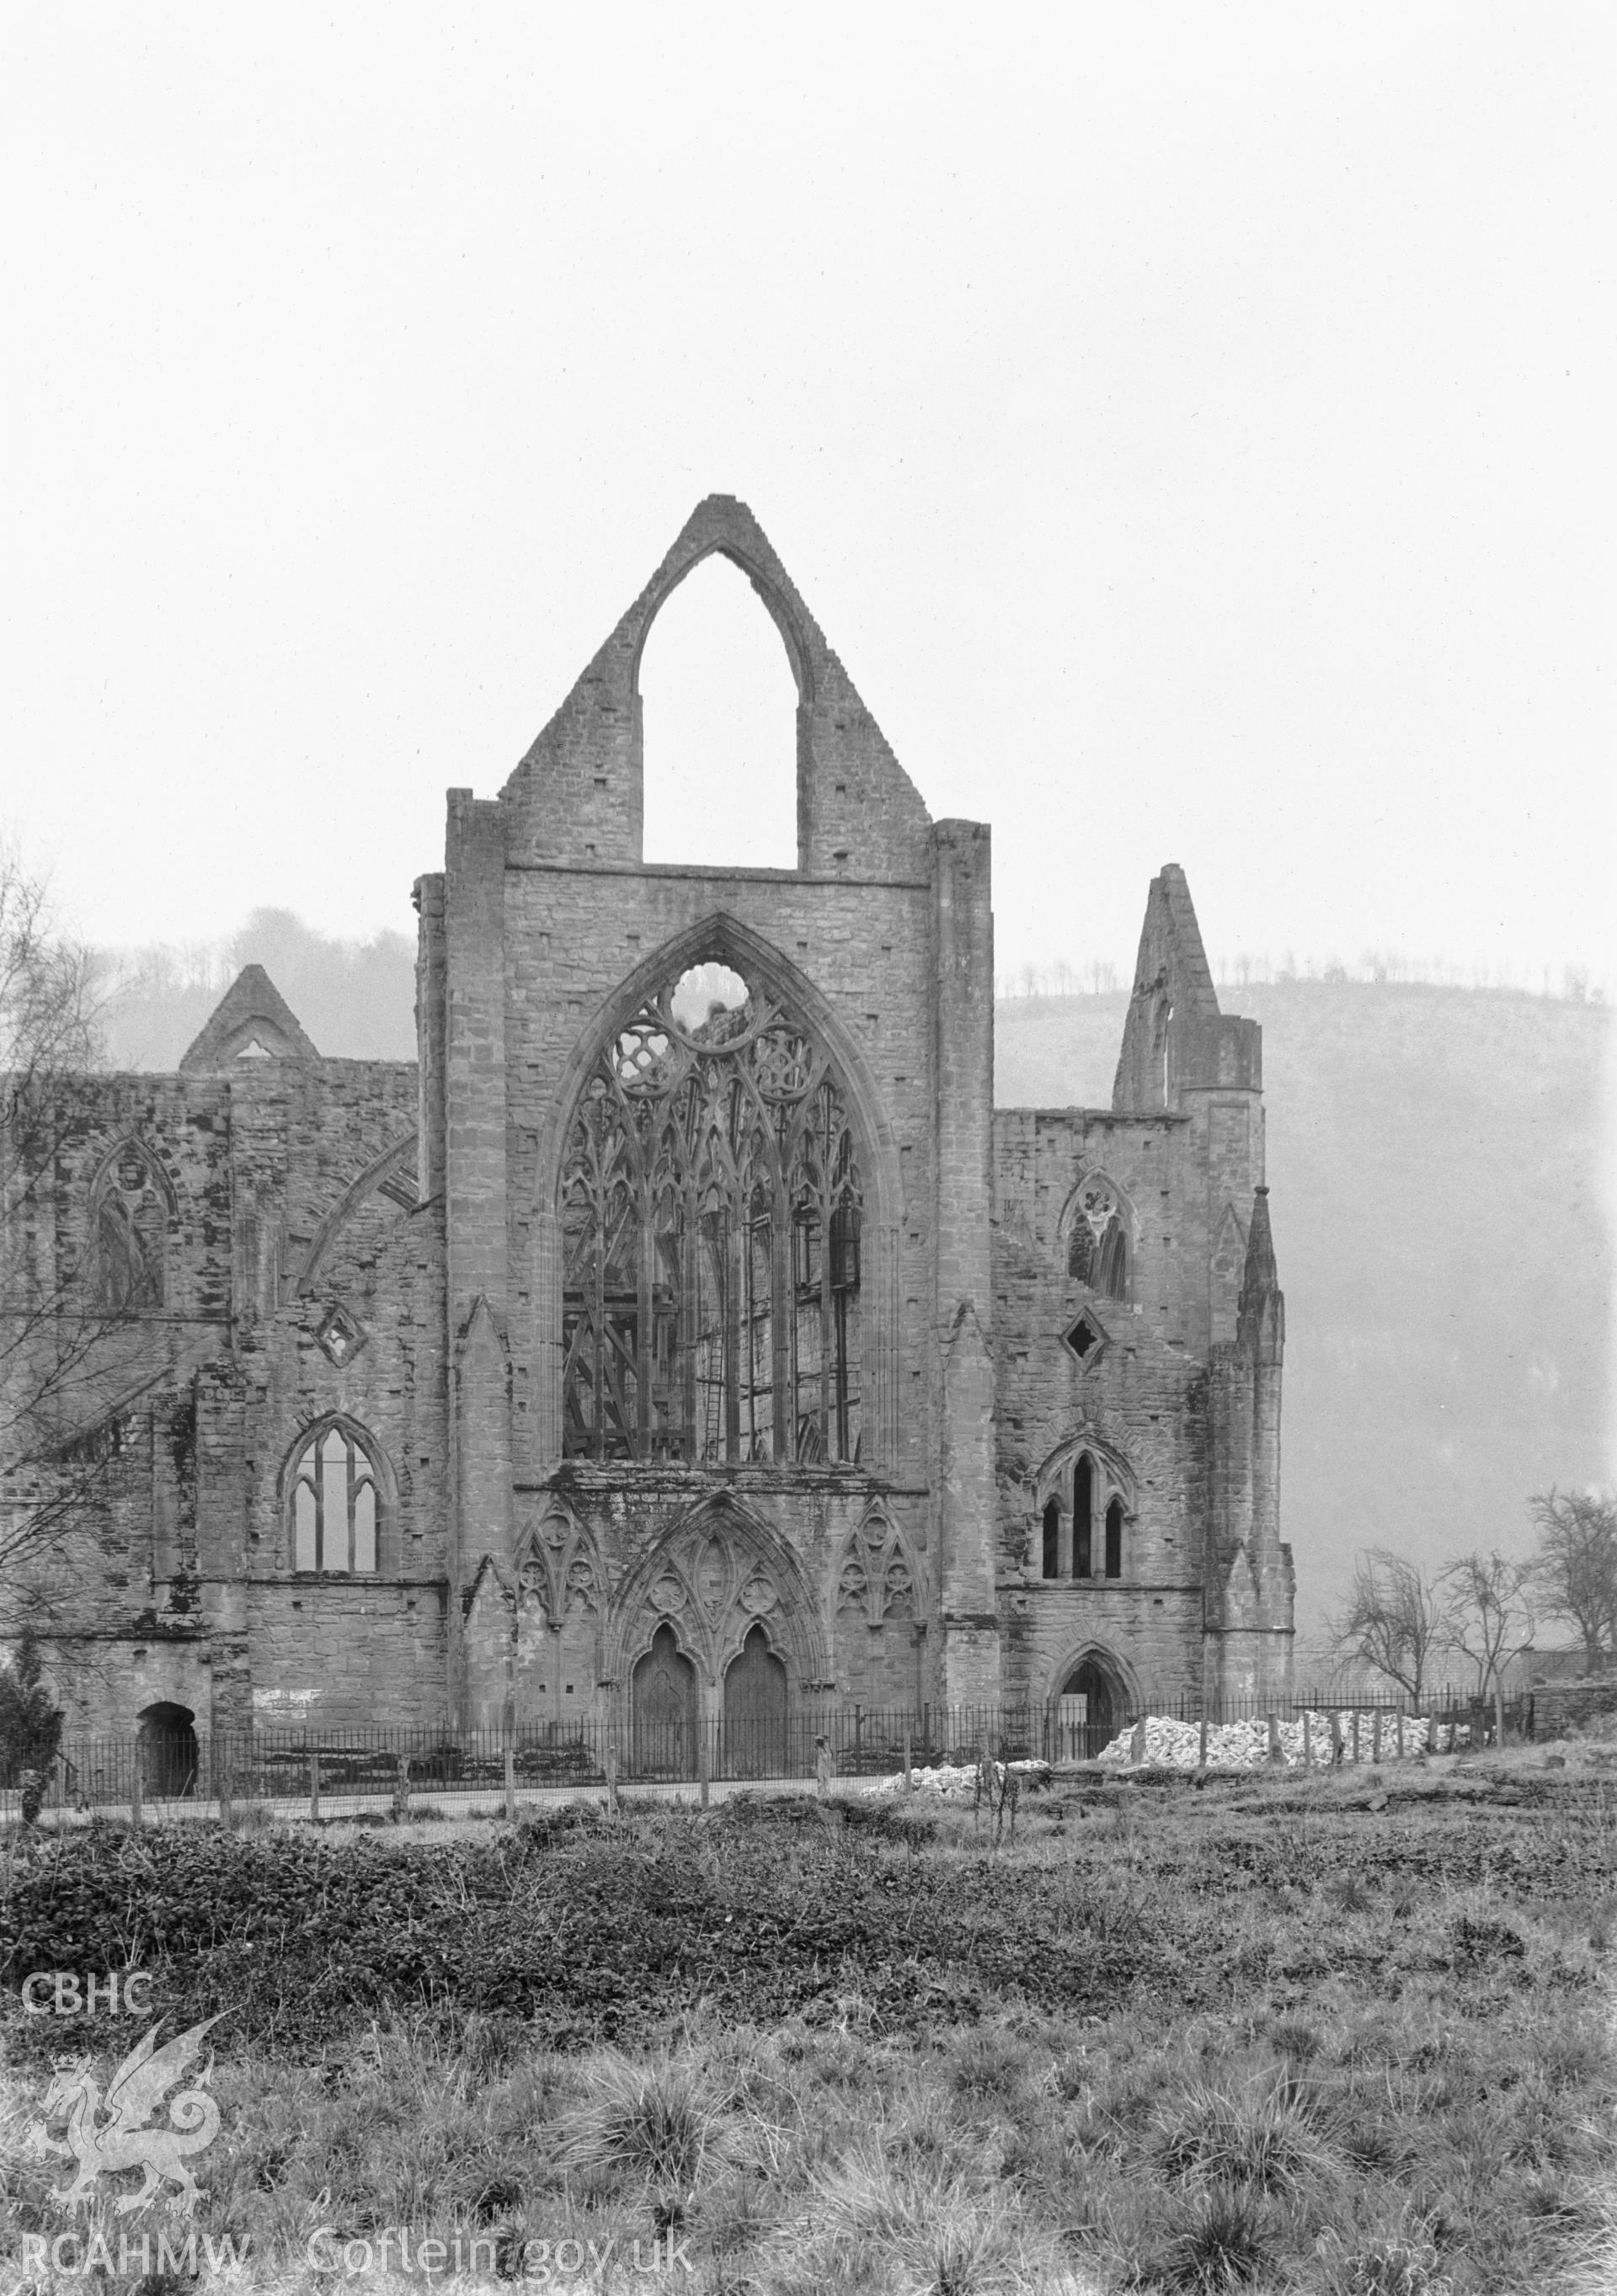 View of the west front of Tintern Abbey.